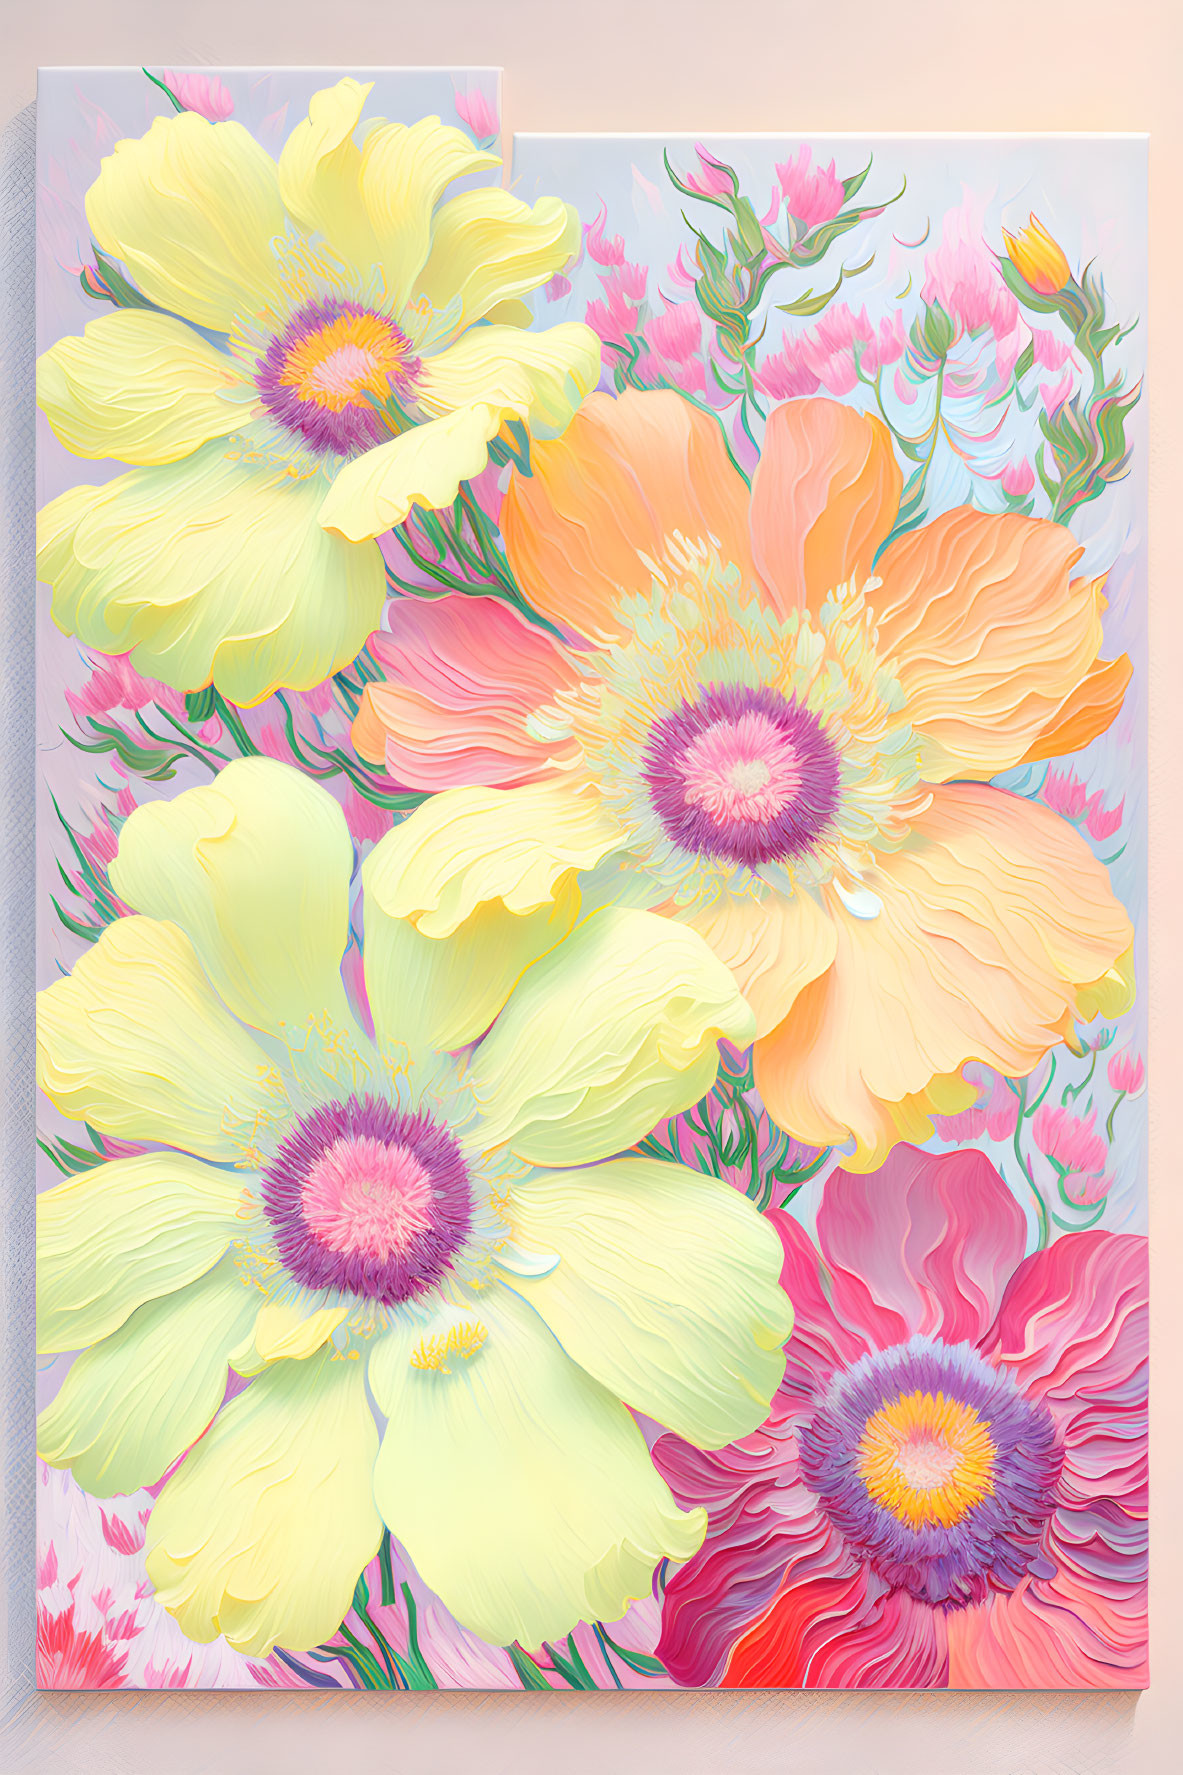 Colorful Textured Artwork: Oversized Blossoming Flowers in Yellow, Orange, and Pink